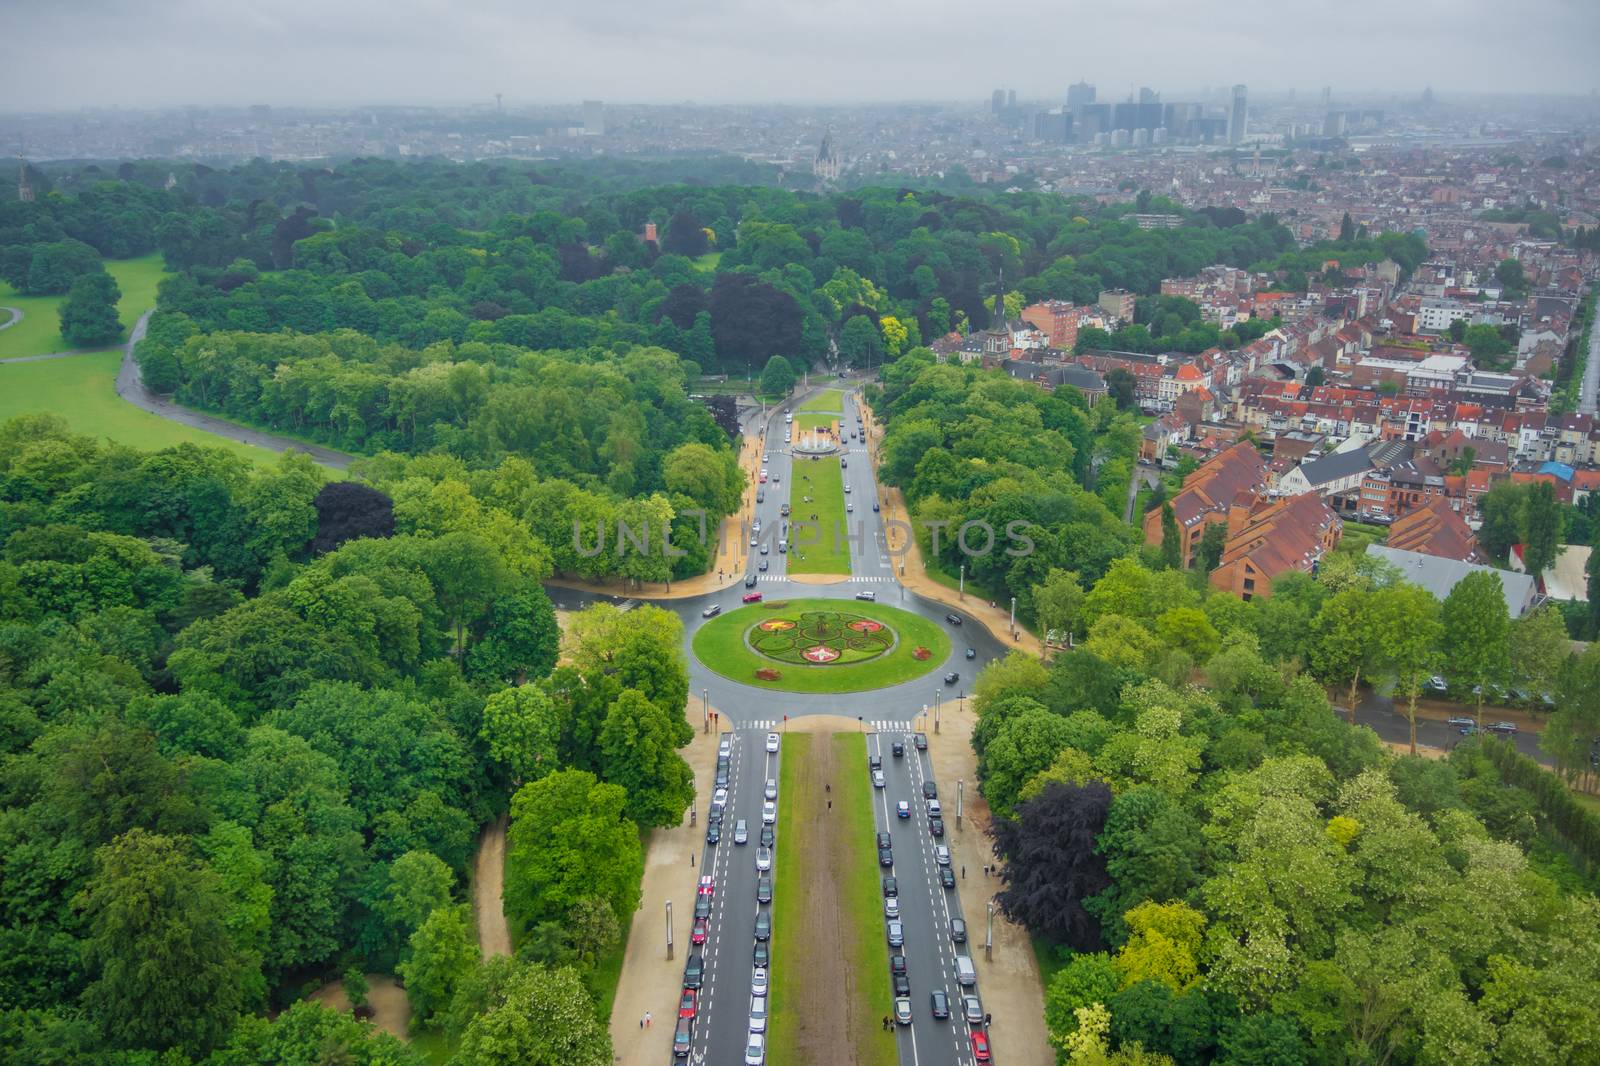 View from the top of the Atomium in Brussels towards city center by MXW_Stock